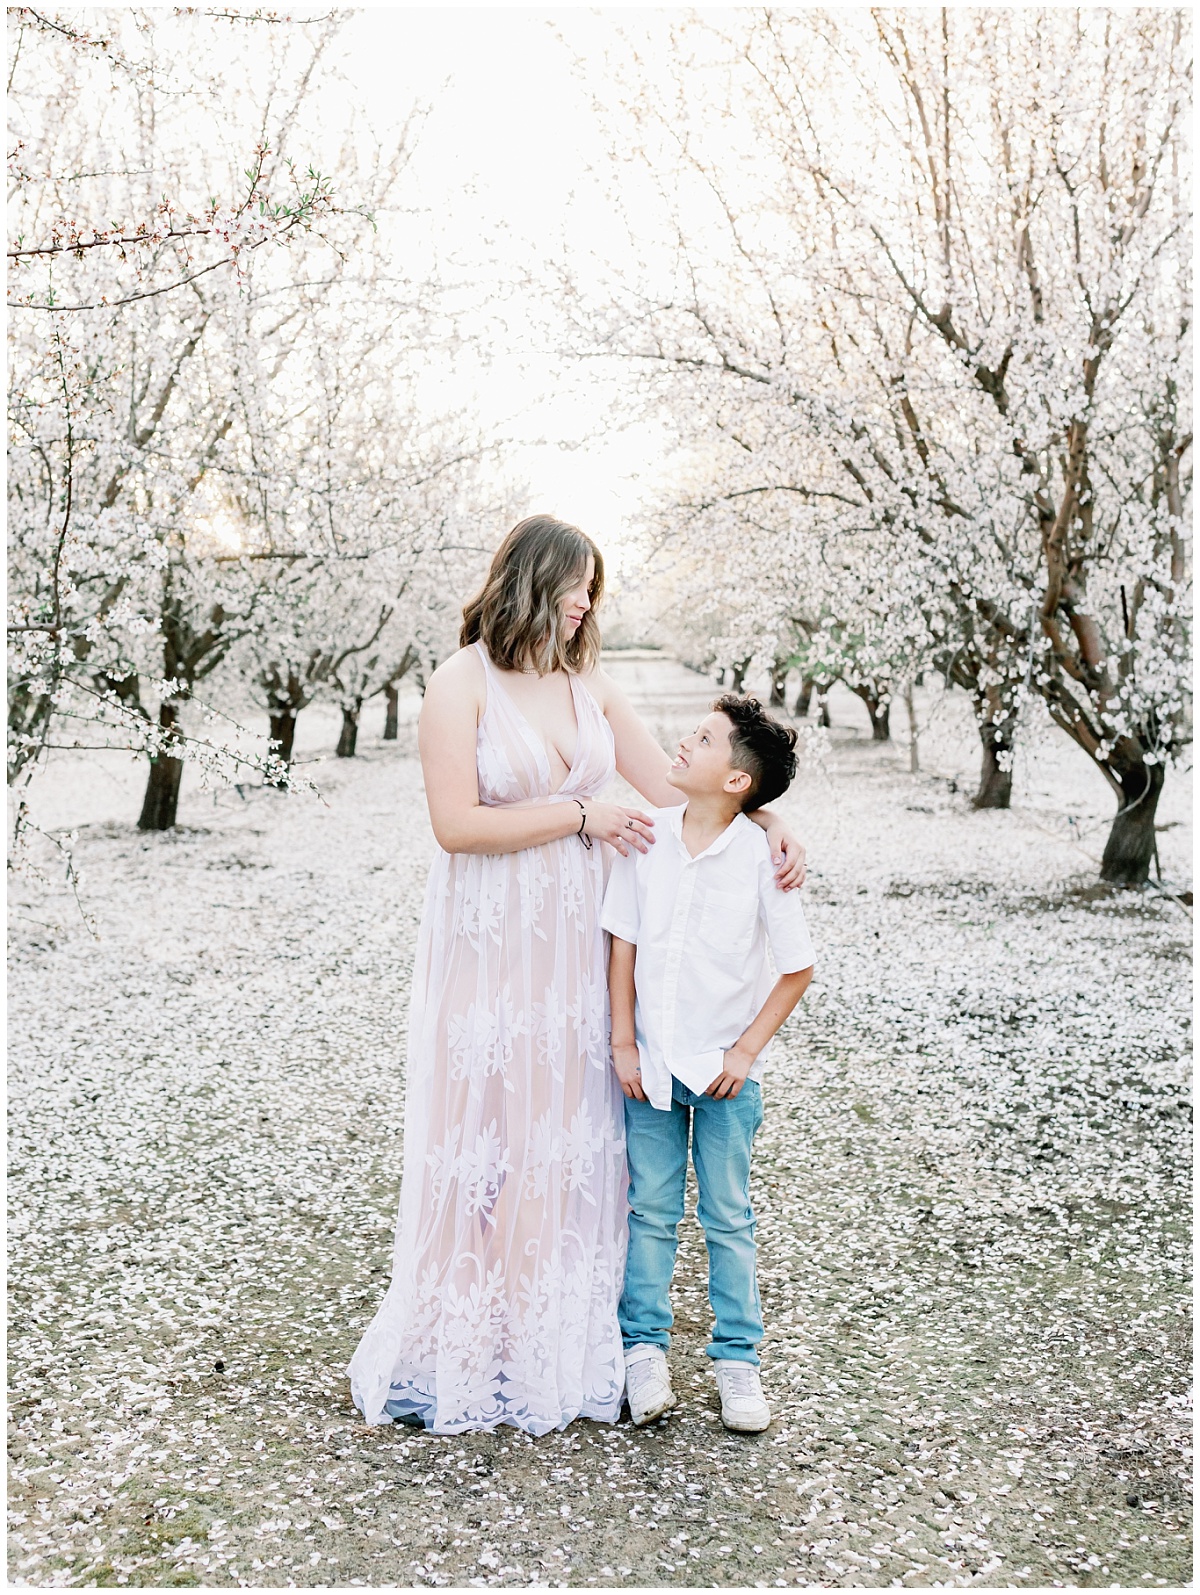 Sibling Photos in Cherry Blossoms